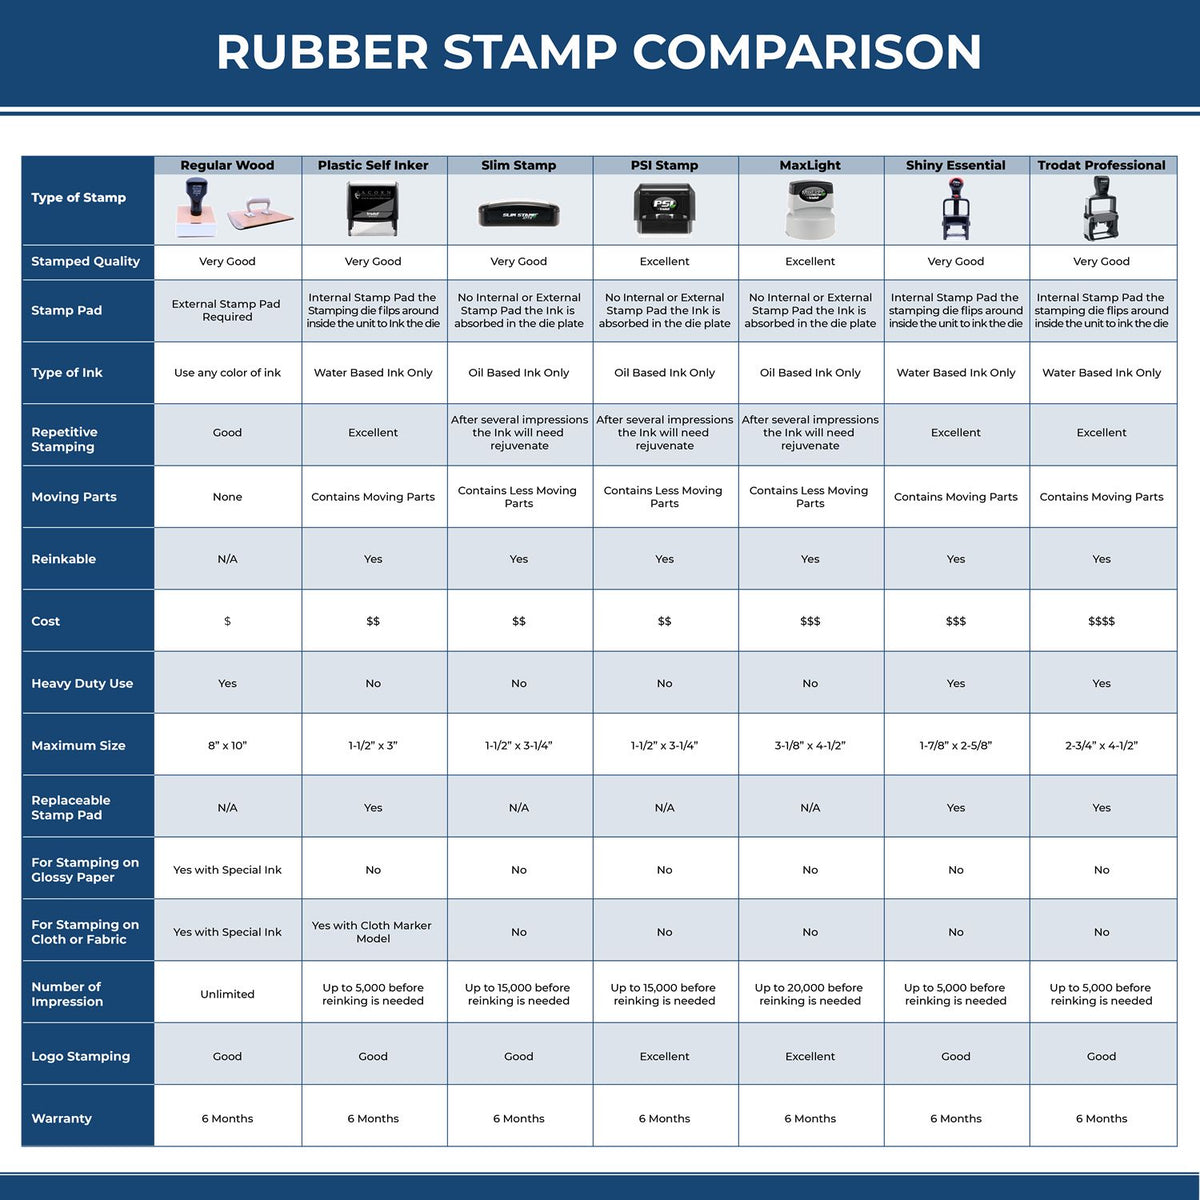 Large Self Inking Good Work Stamp 4667S Rubber Stamp Comparison